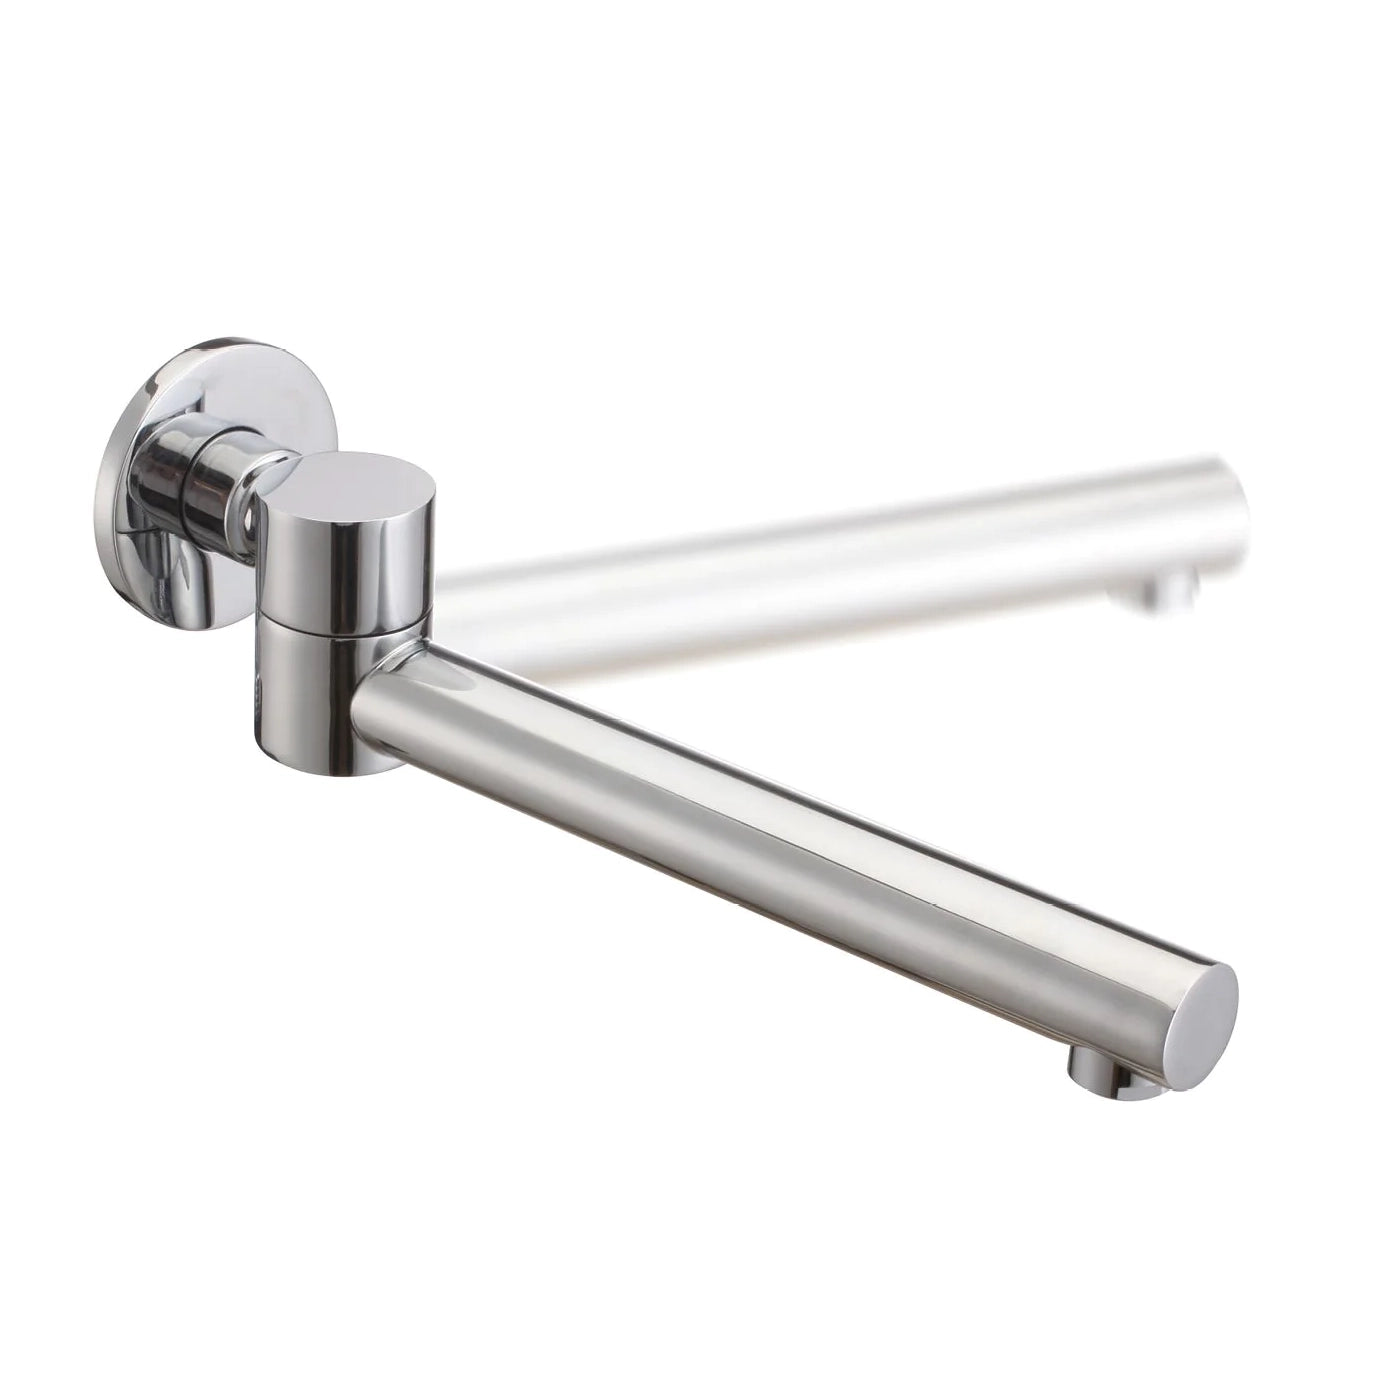 Lucid Pin Round Swivel Wall Spout: Modern fixture for bathtubs/basins, offering flexibility and style-CH0004.BS